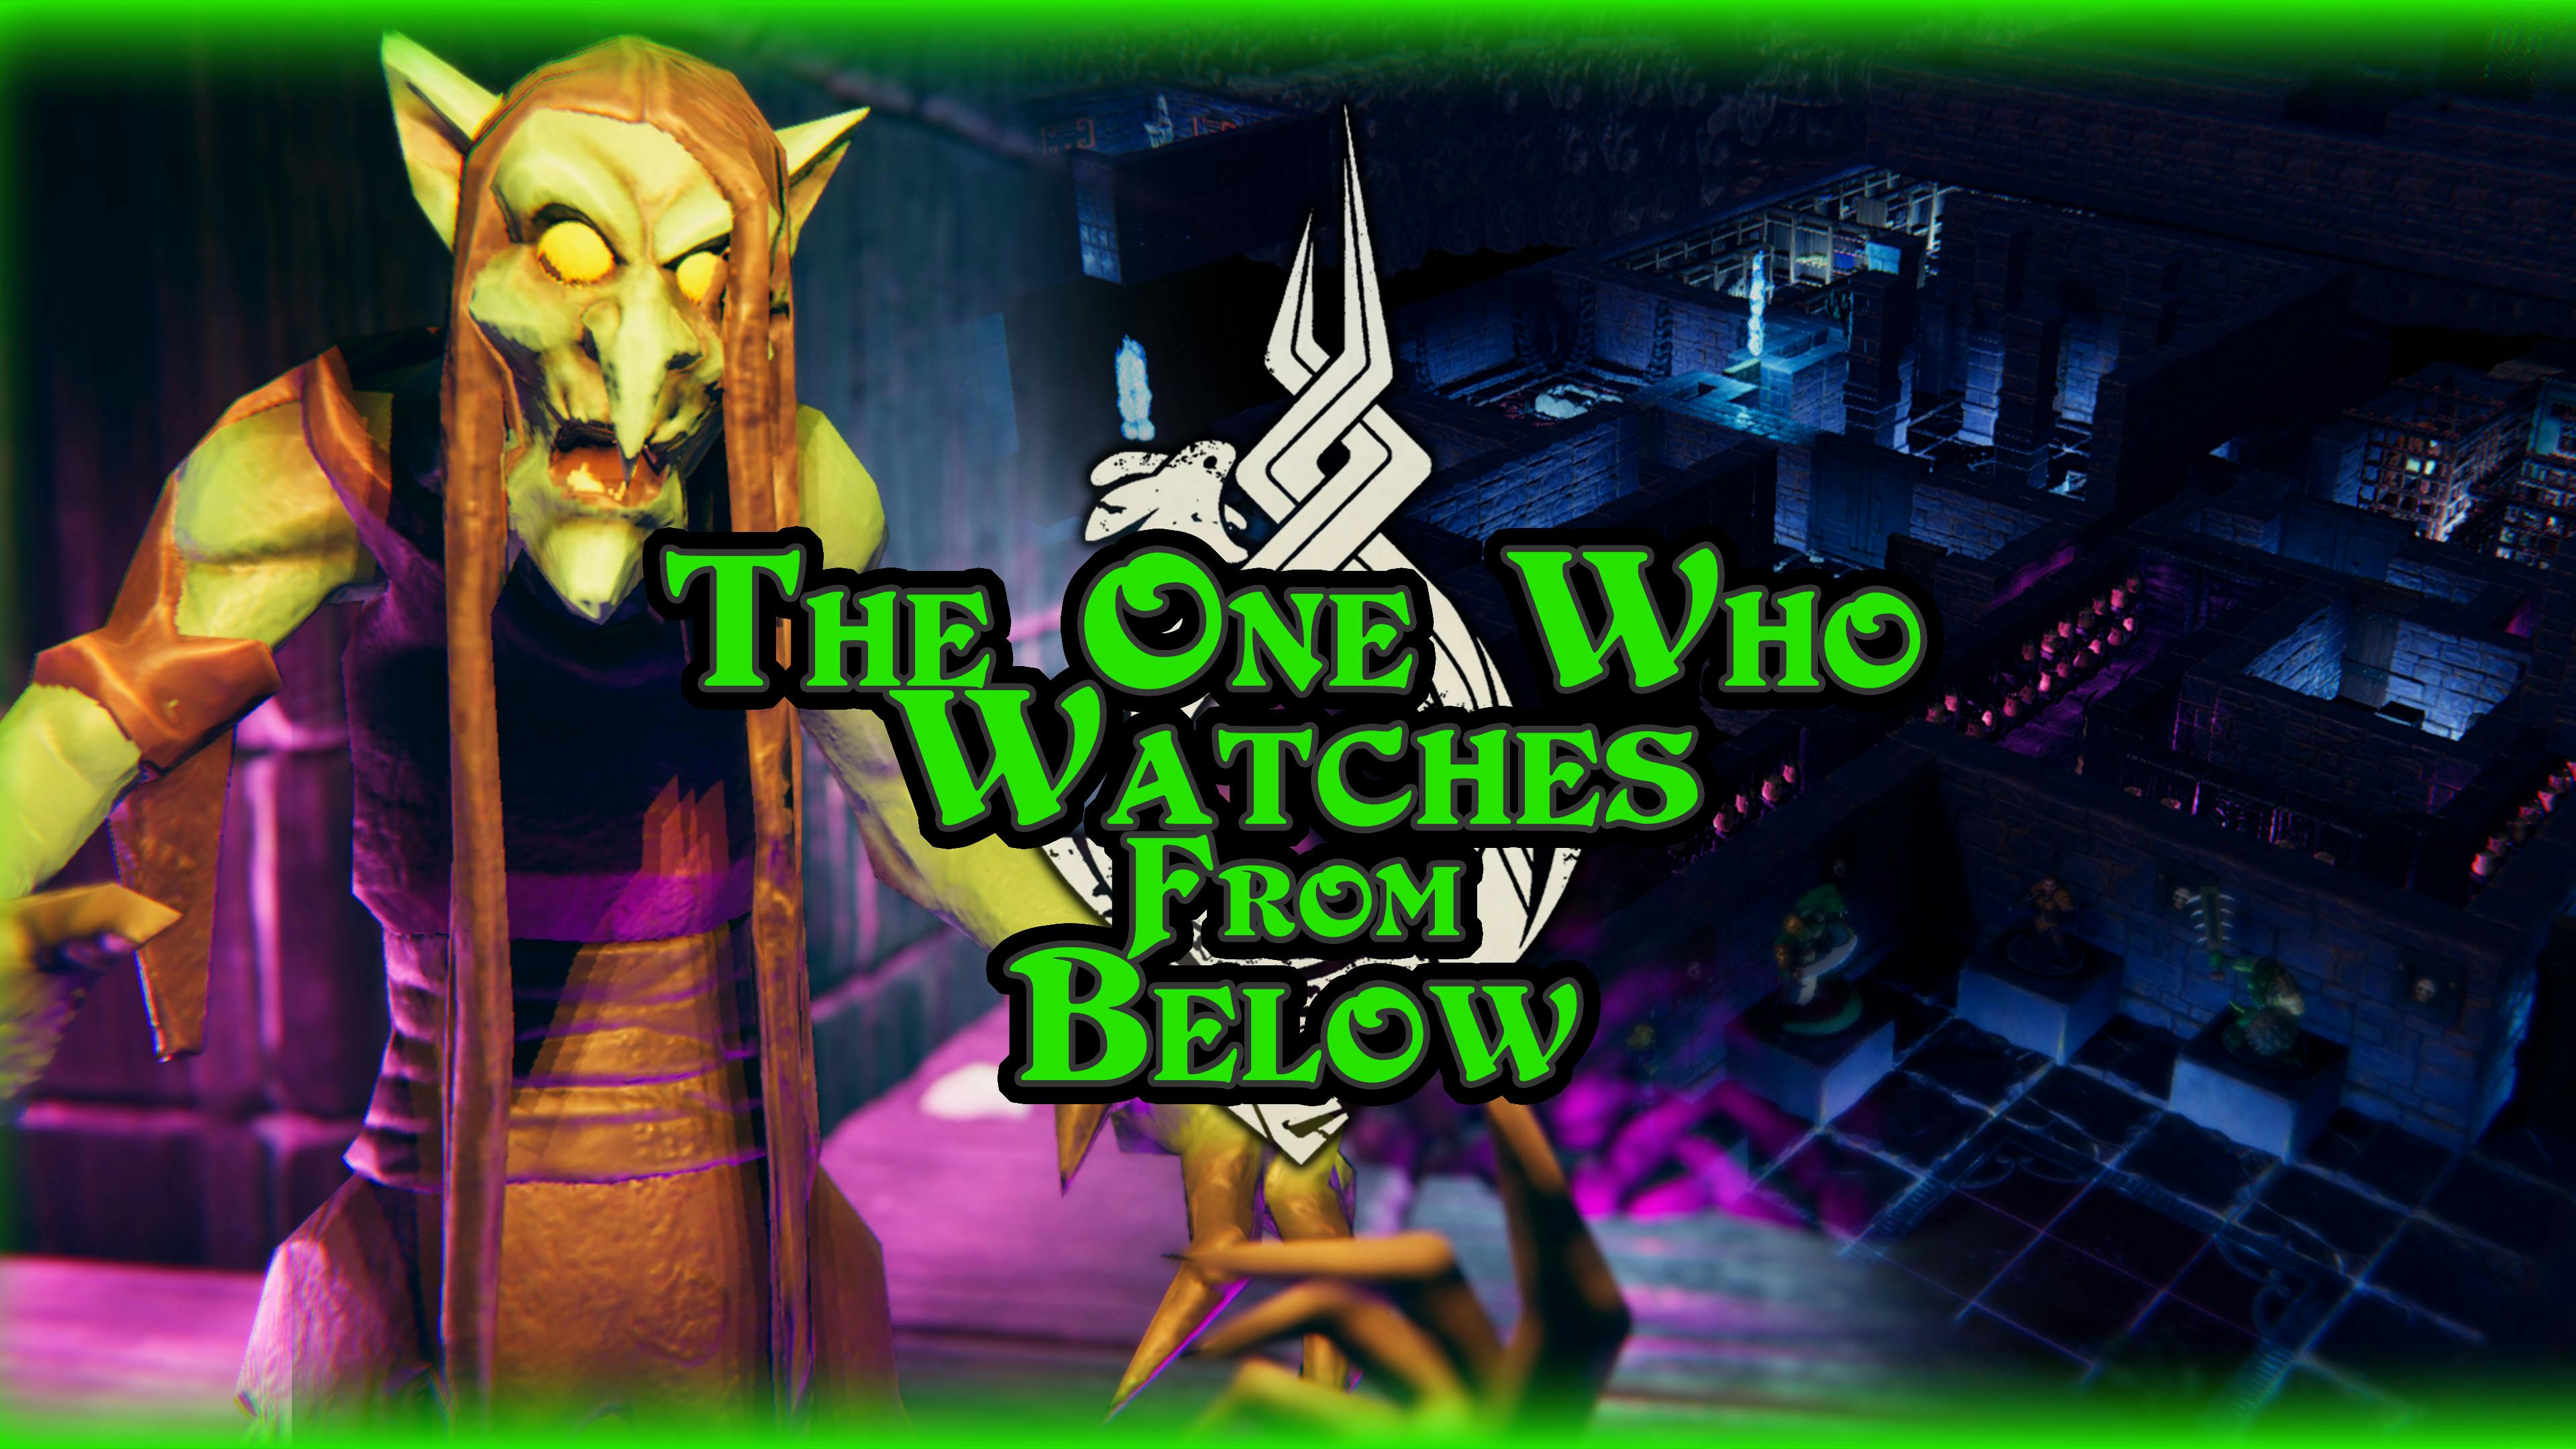 Play Dungeon Crawl Classics Online  Dungeon Crawl Classics: The One Who  Watches From Below